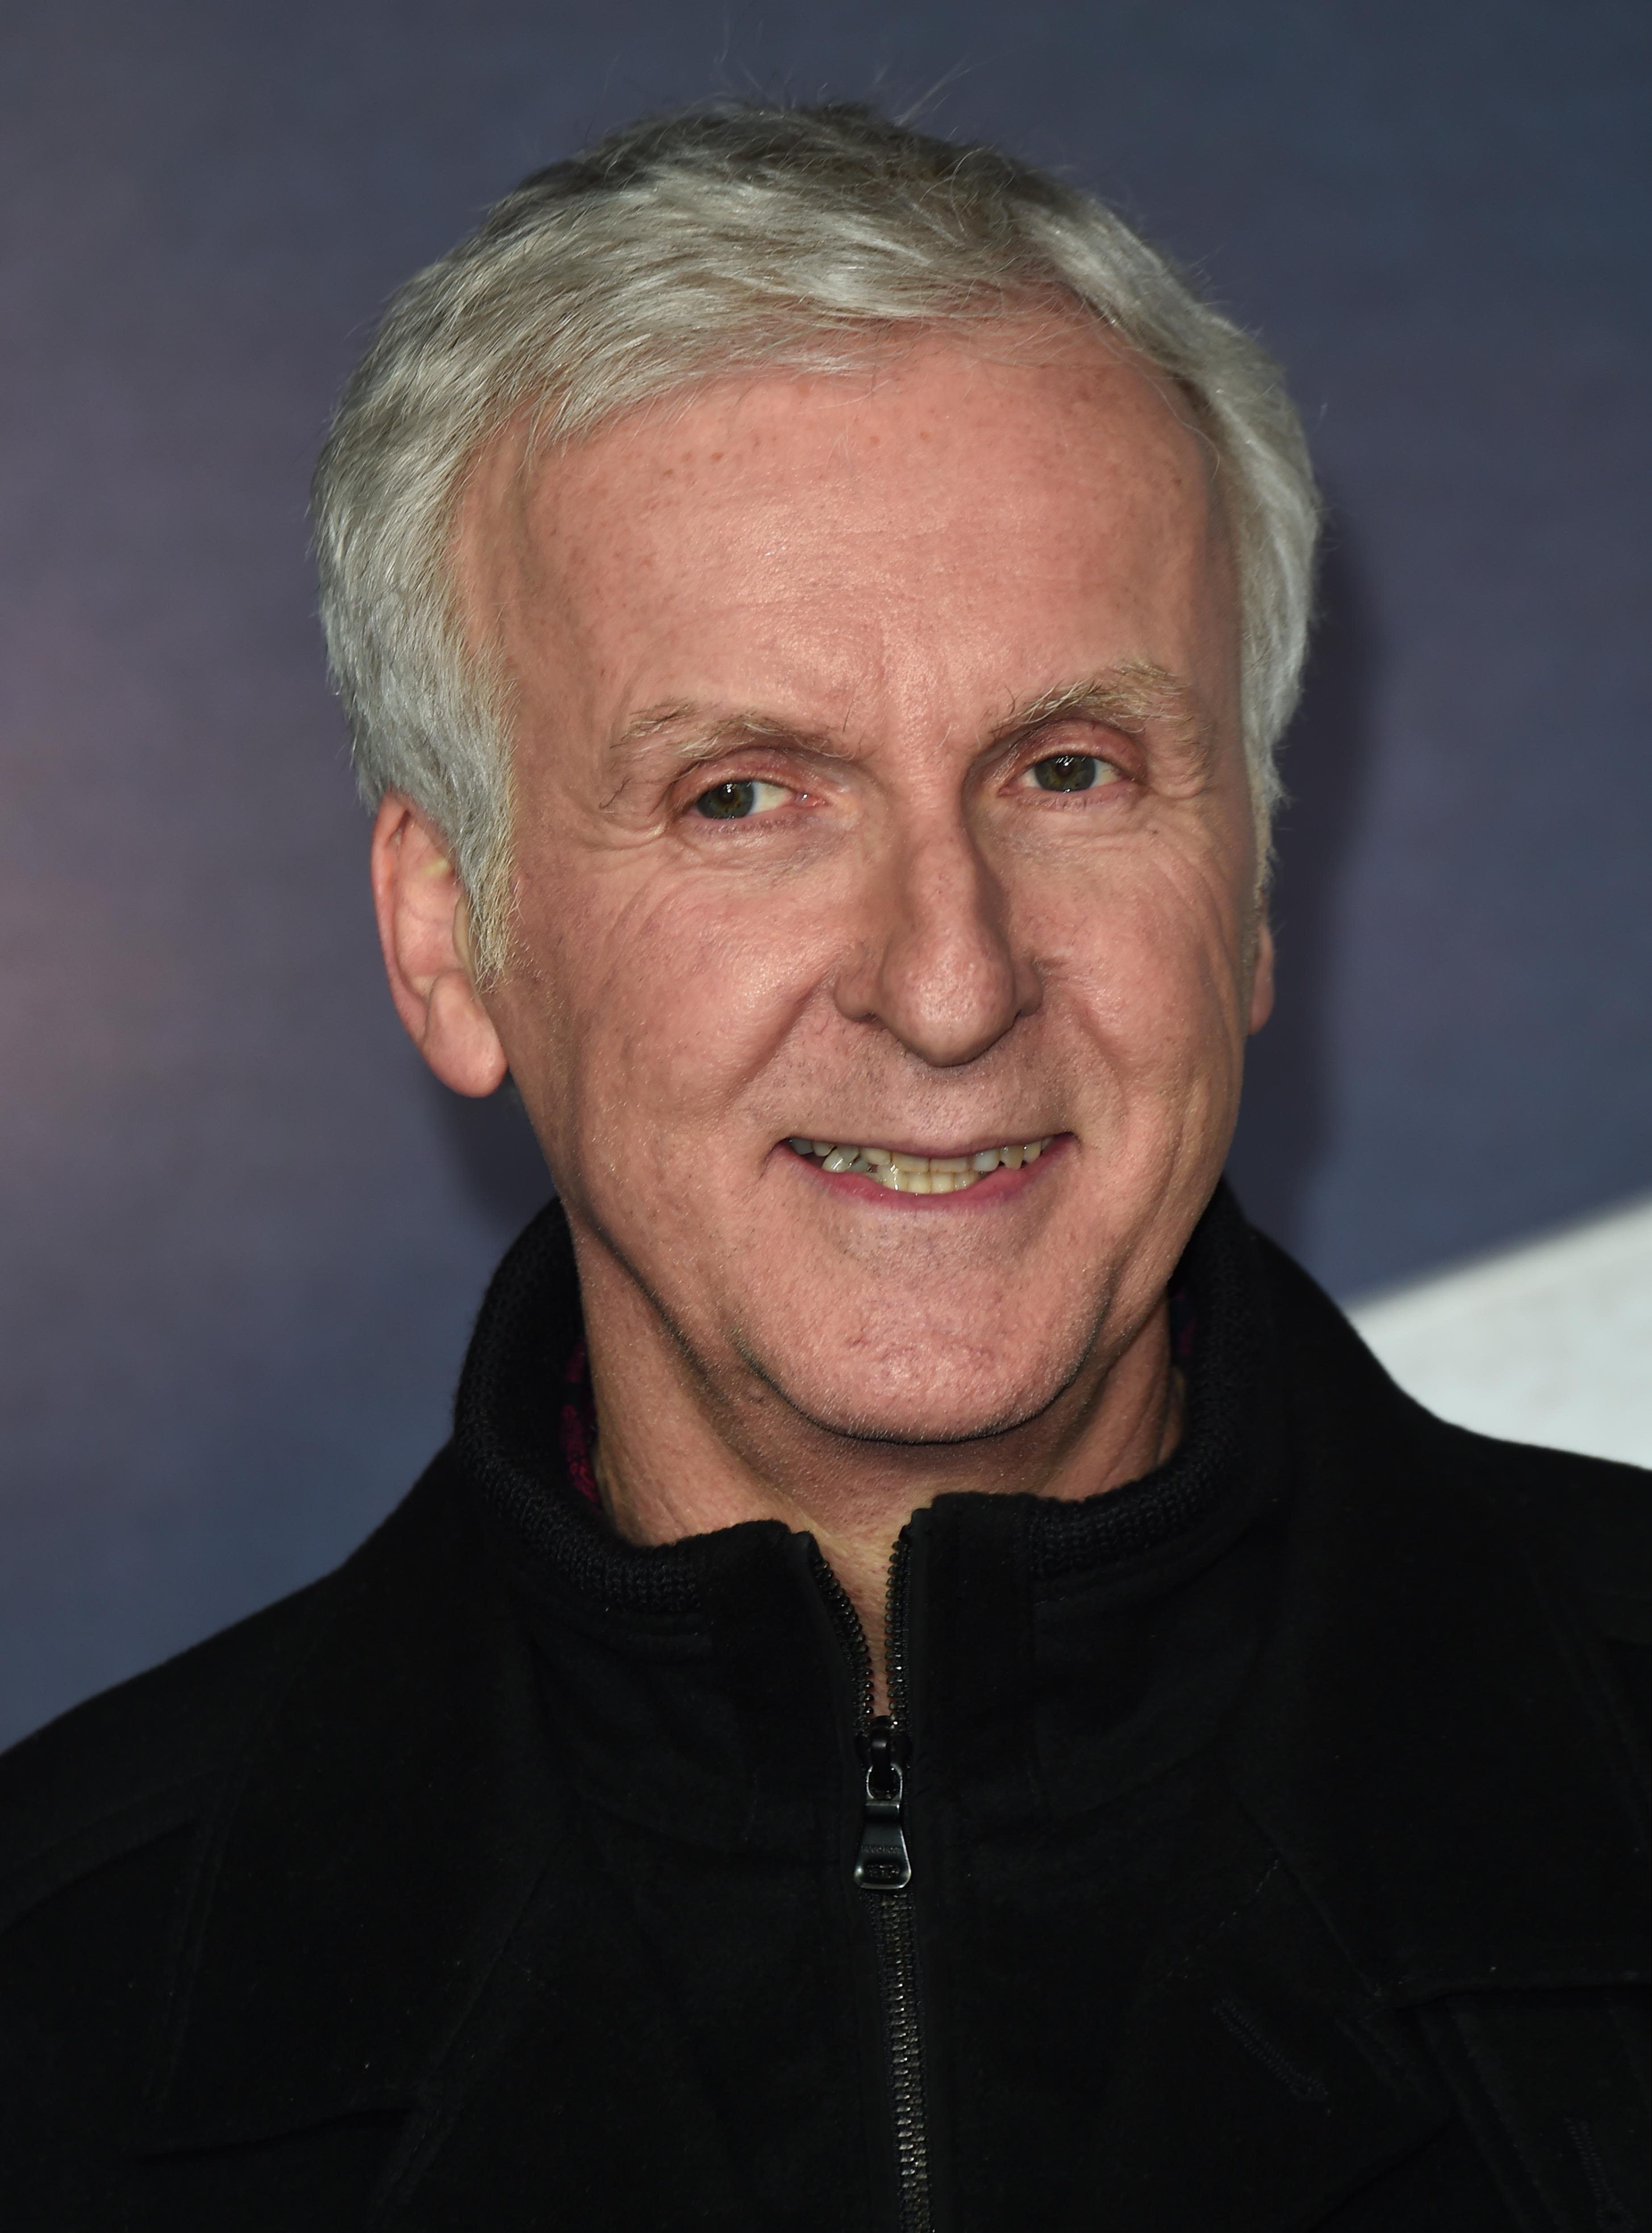 James Cameron attends the "Alita: Battle Angel" world premiere at the Odeon Leicester Square, Luxe Cinema on January 31, 2019. | Photo: Getty Images